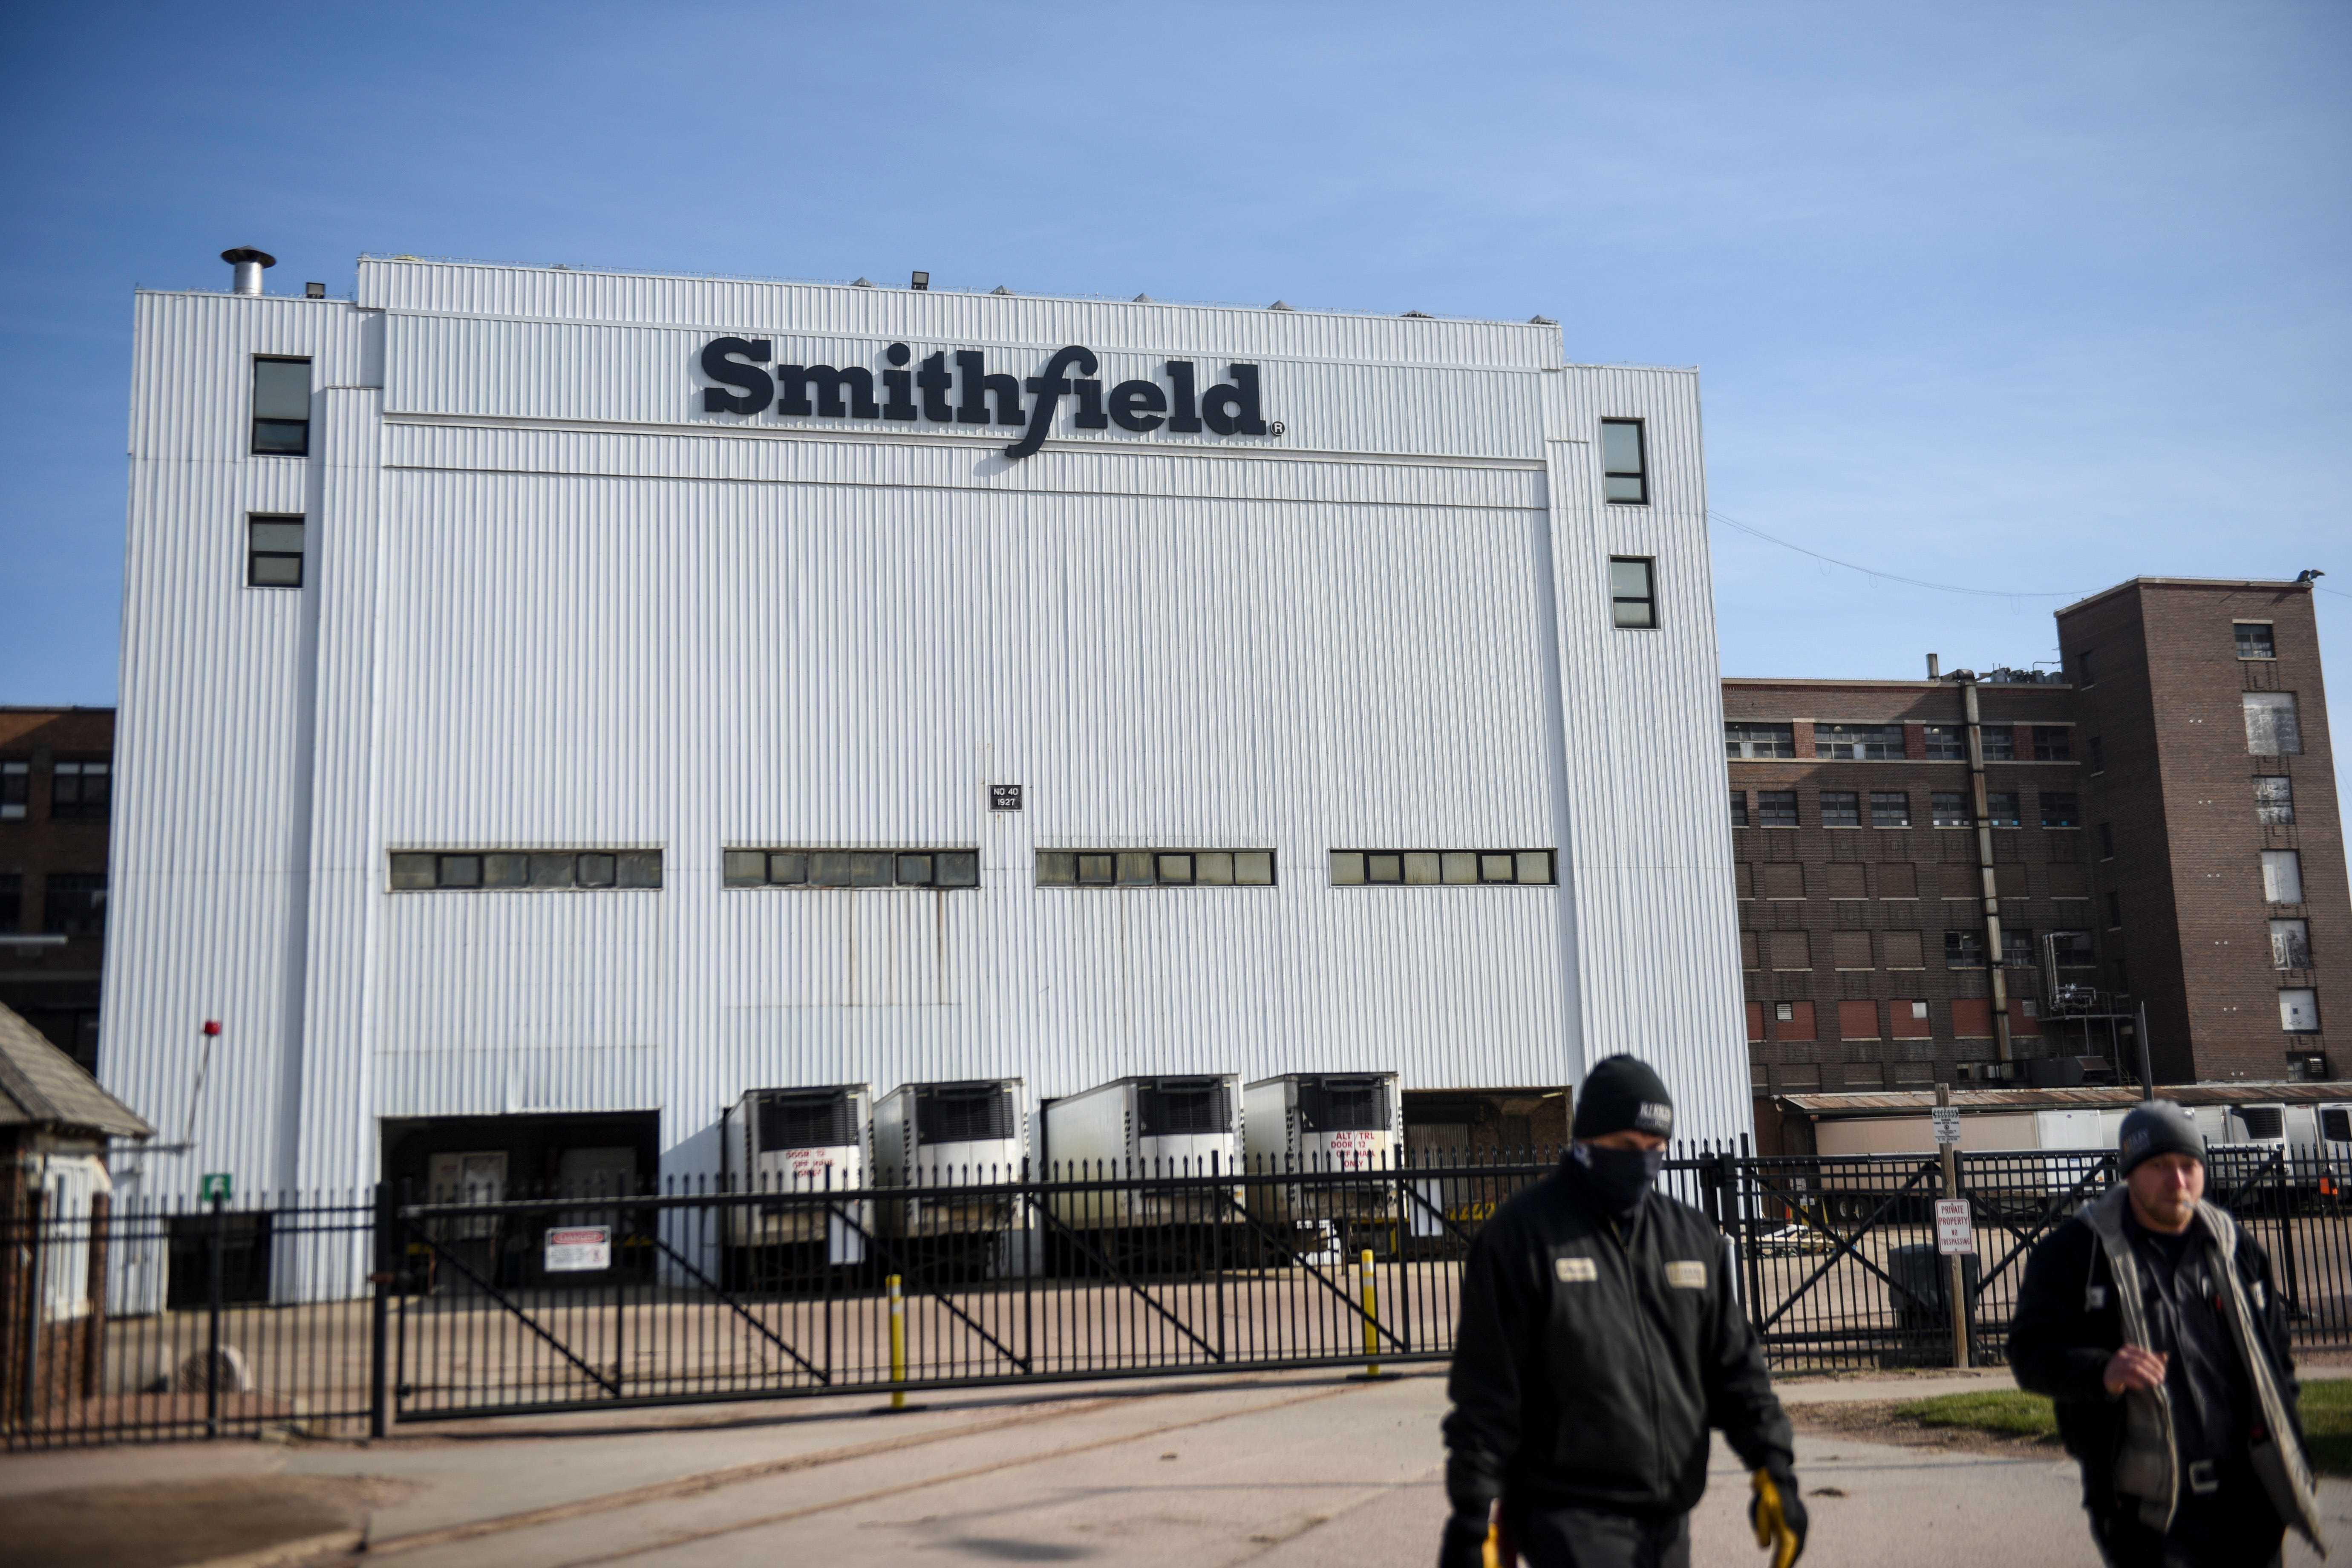 Smithfield Foods of Sioux Falls, S.D., was once the nation's largest hot spot for COVID-19.